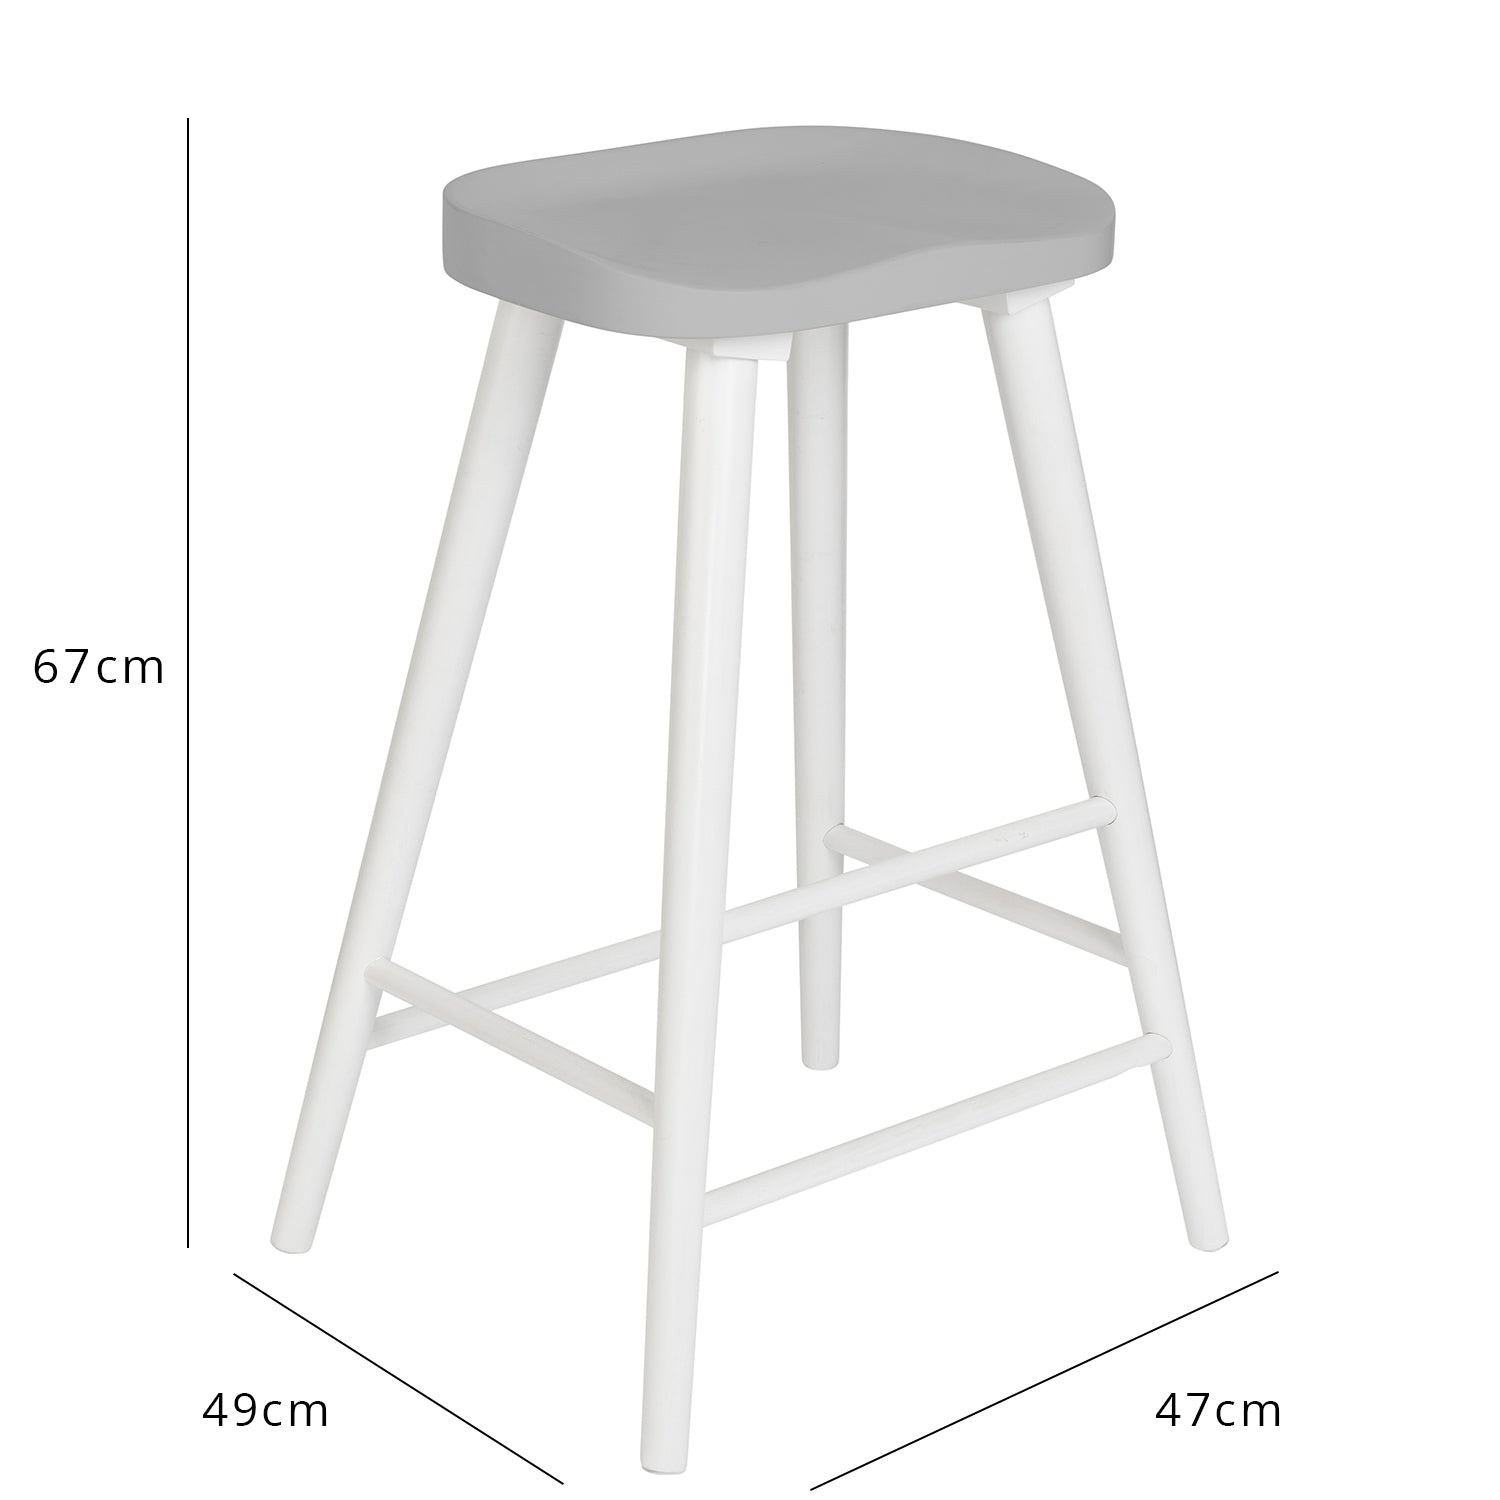 Silvester bar stool - white frame with grey top - Laura James